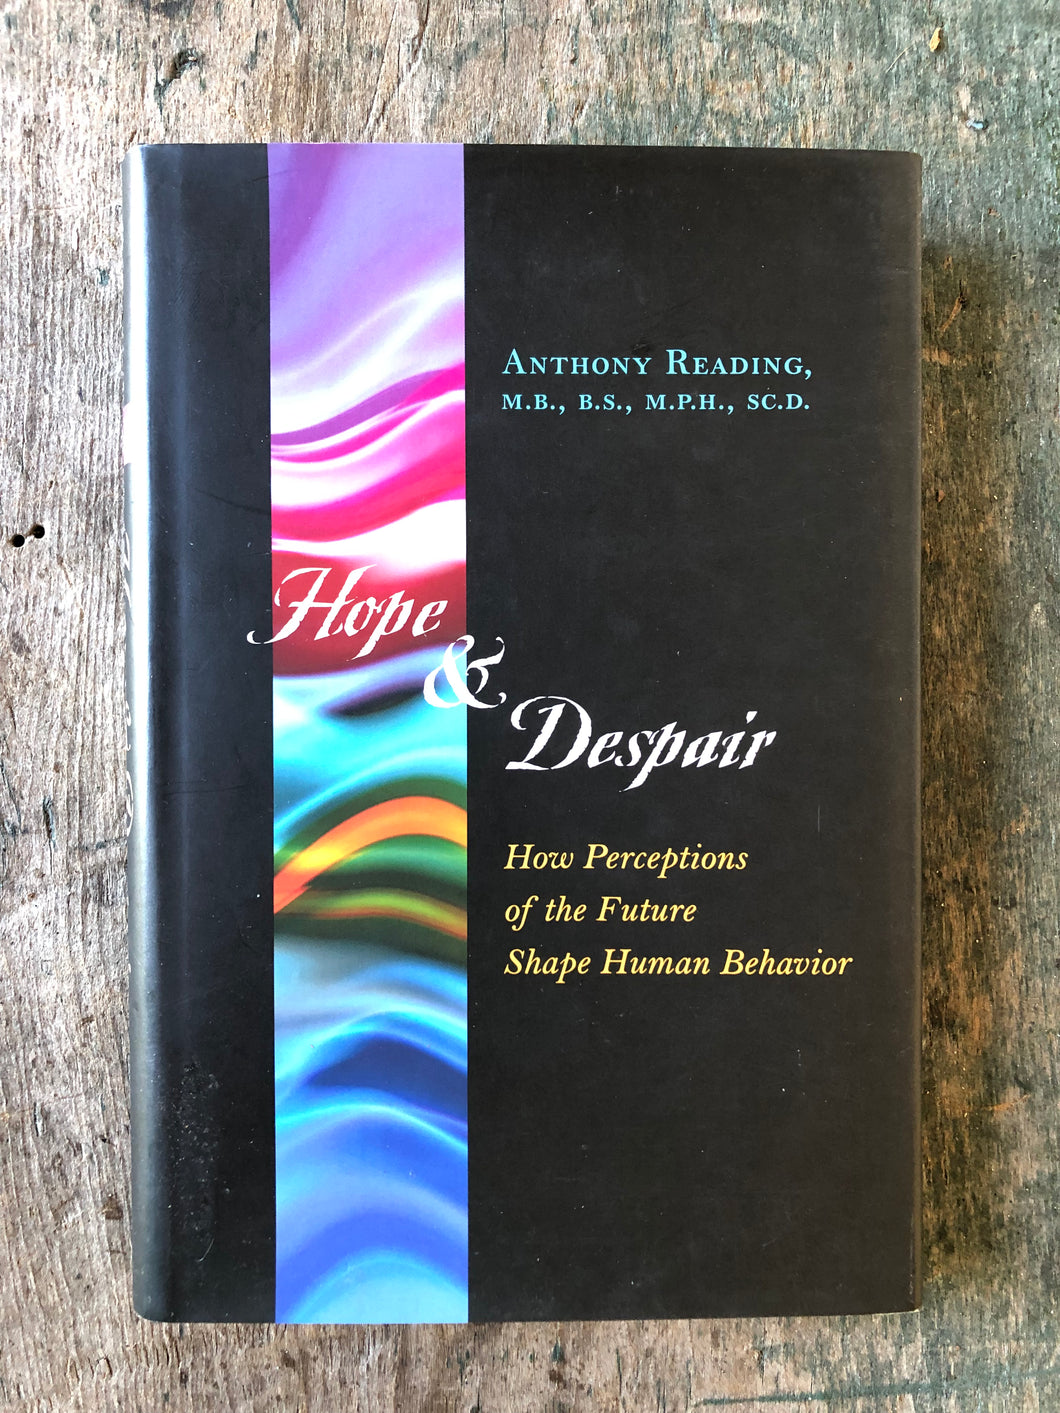 Hope and Despair: How Perceptions of the Future Shape Human Behavior by Anthony Reading